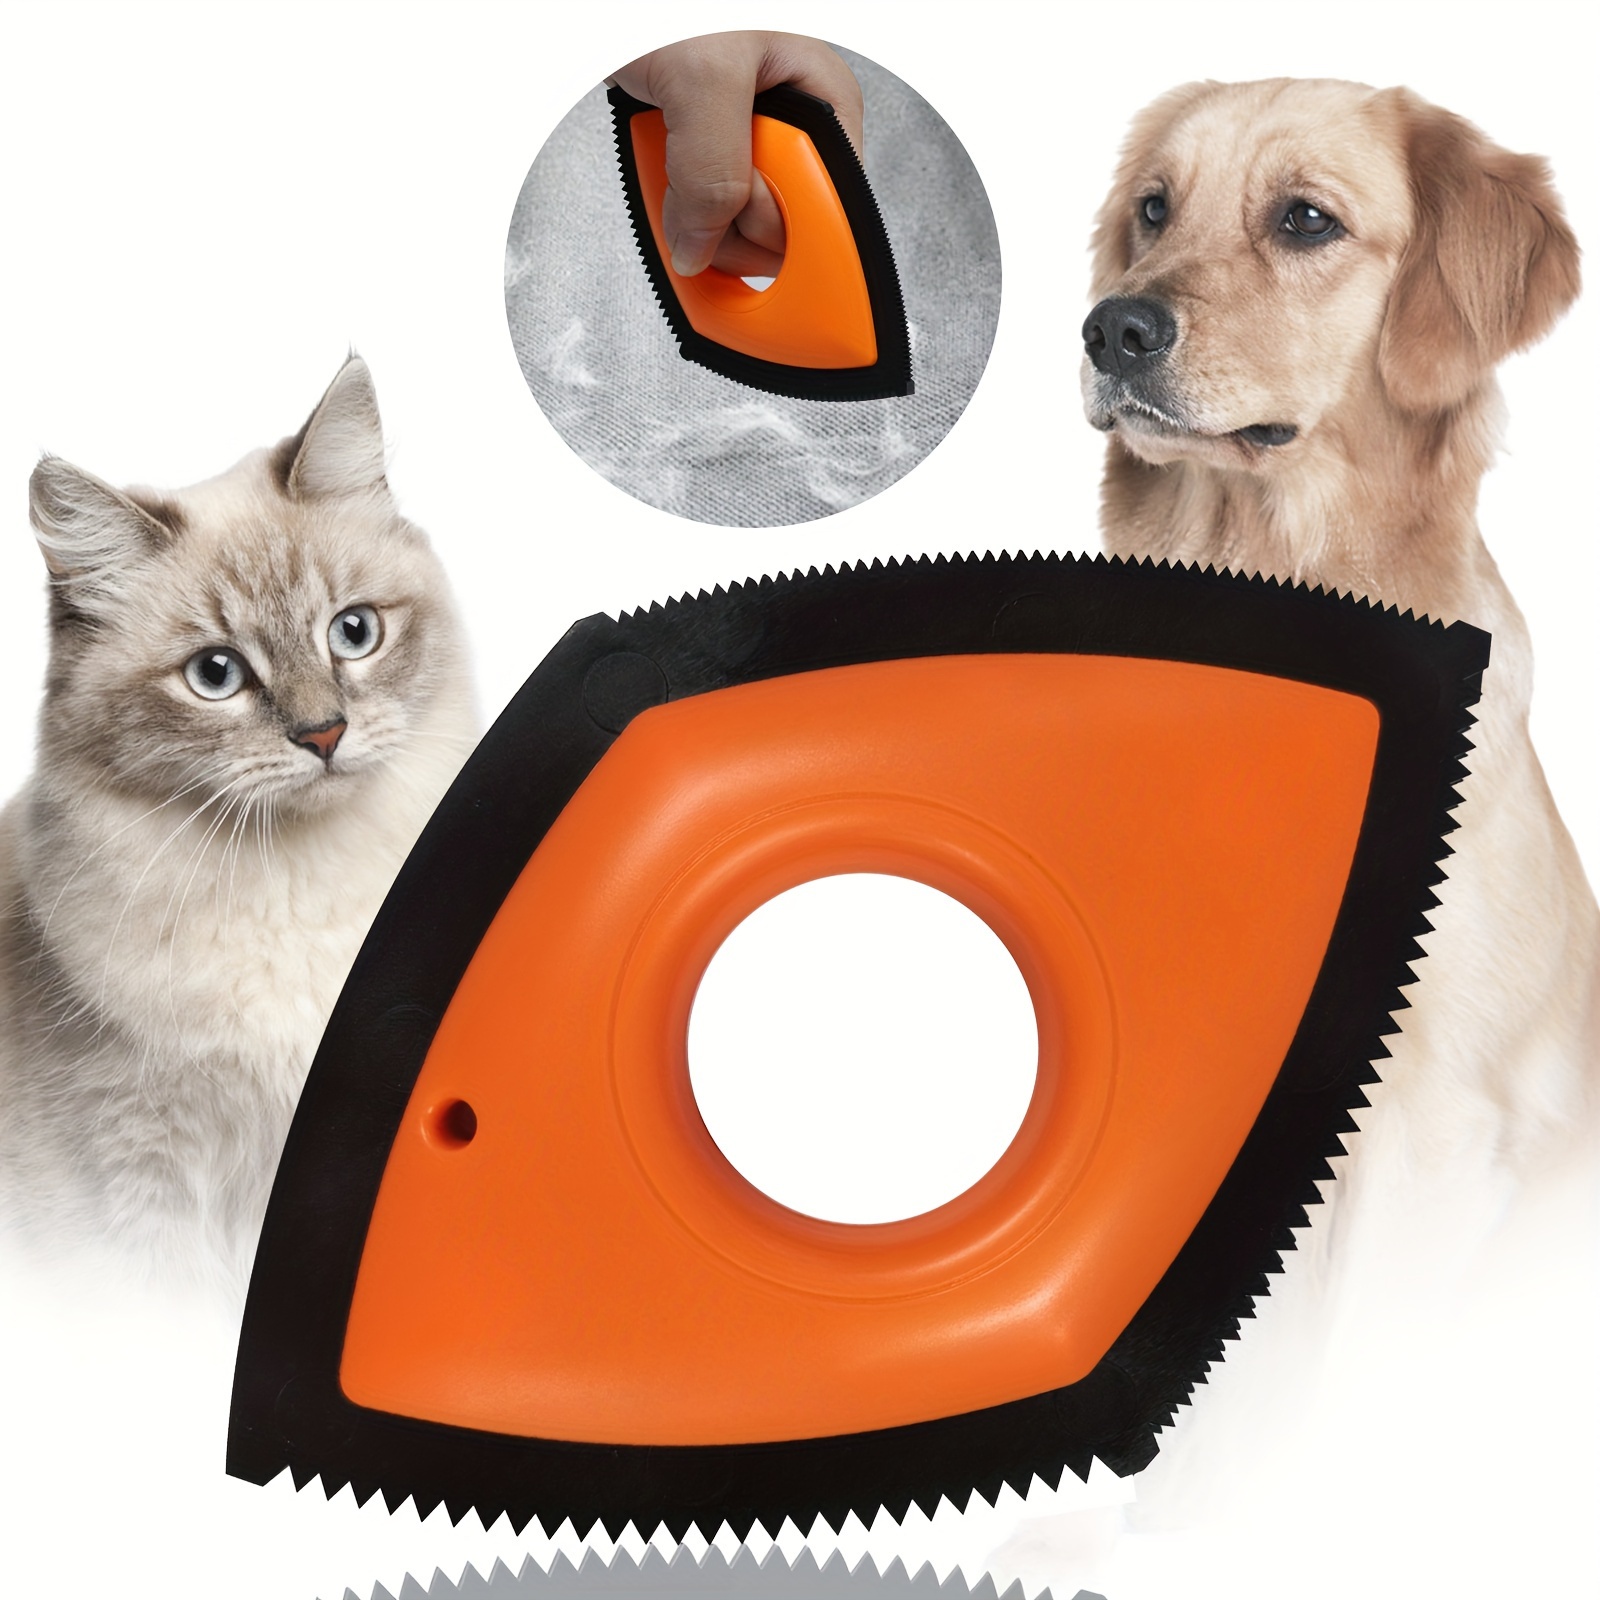 

Mini Easy Cleaner For Detailing Cat Nest Hair Remover Squeegee Pet Brush, Pet Hair Scraper, Dog Hair Detailer For Couch Sofa Car Clothes